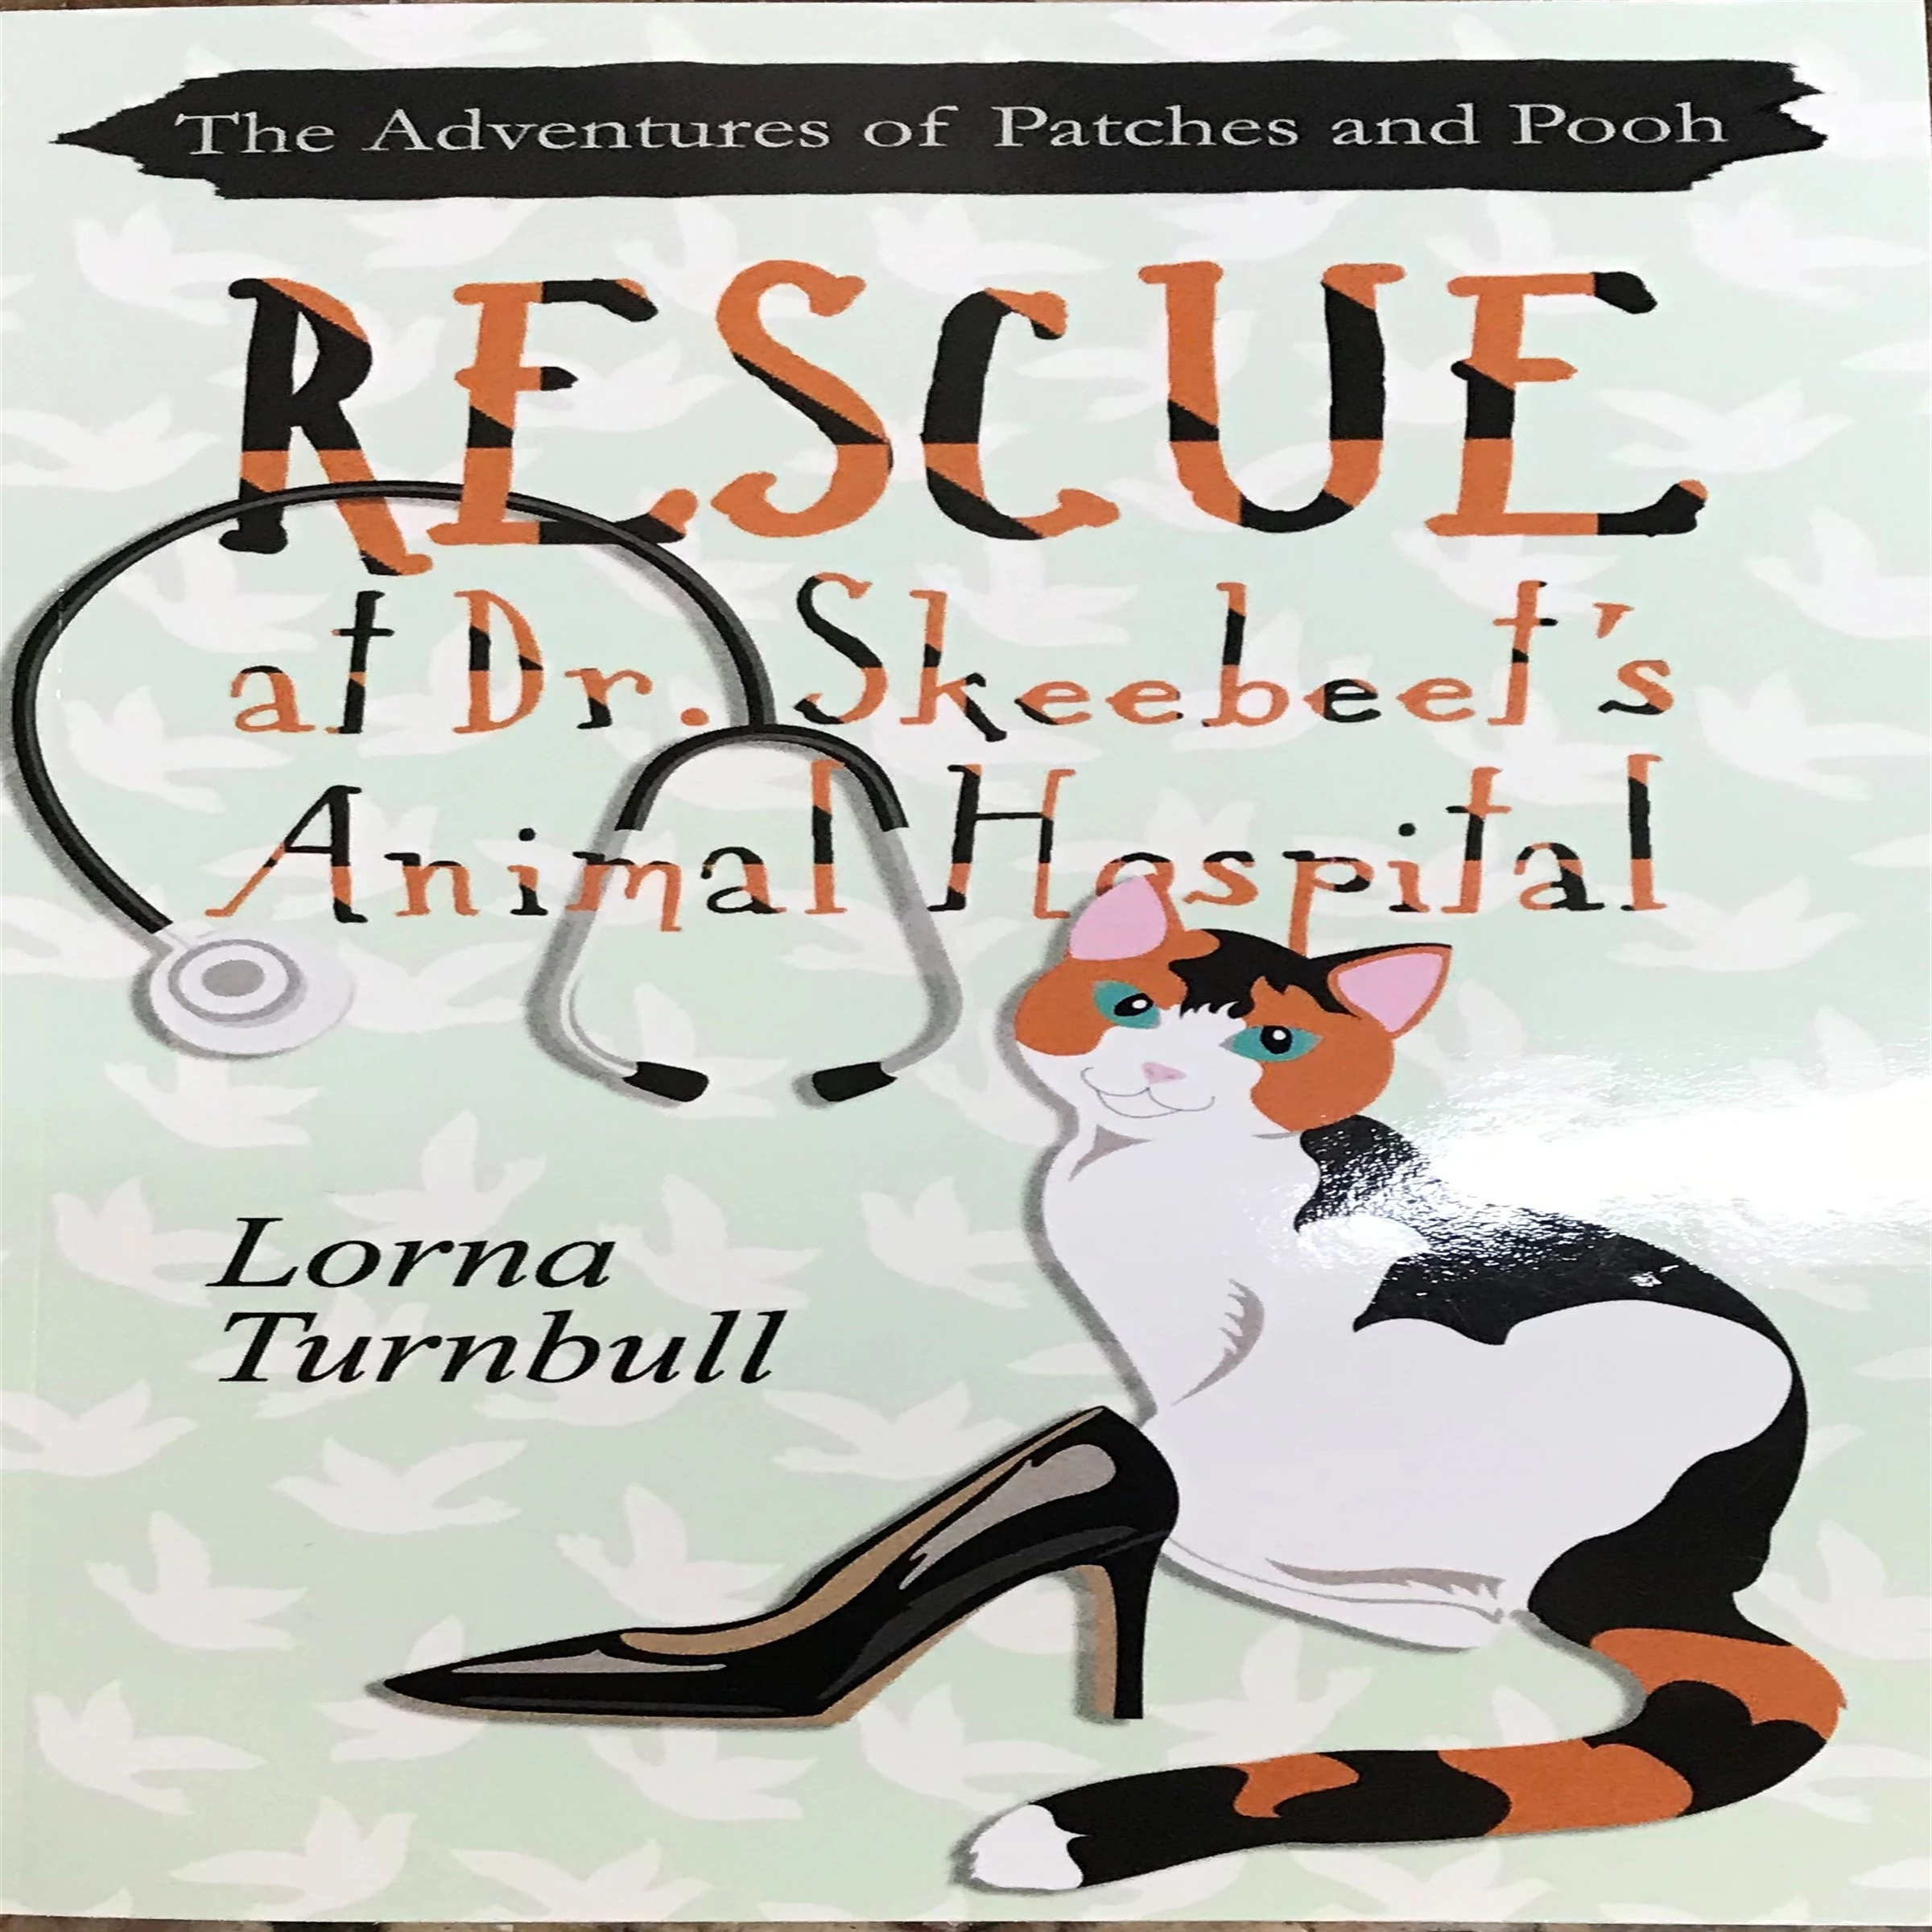 The Adventures of Patches and Pooh: Rescue at Dr. Skeebeet's Animal Hospital by Lorna Turnbull Audiobook